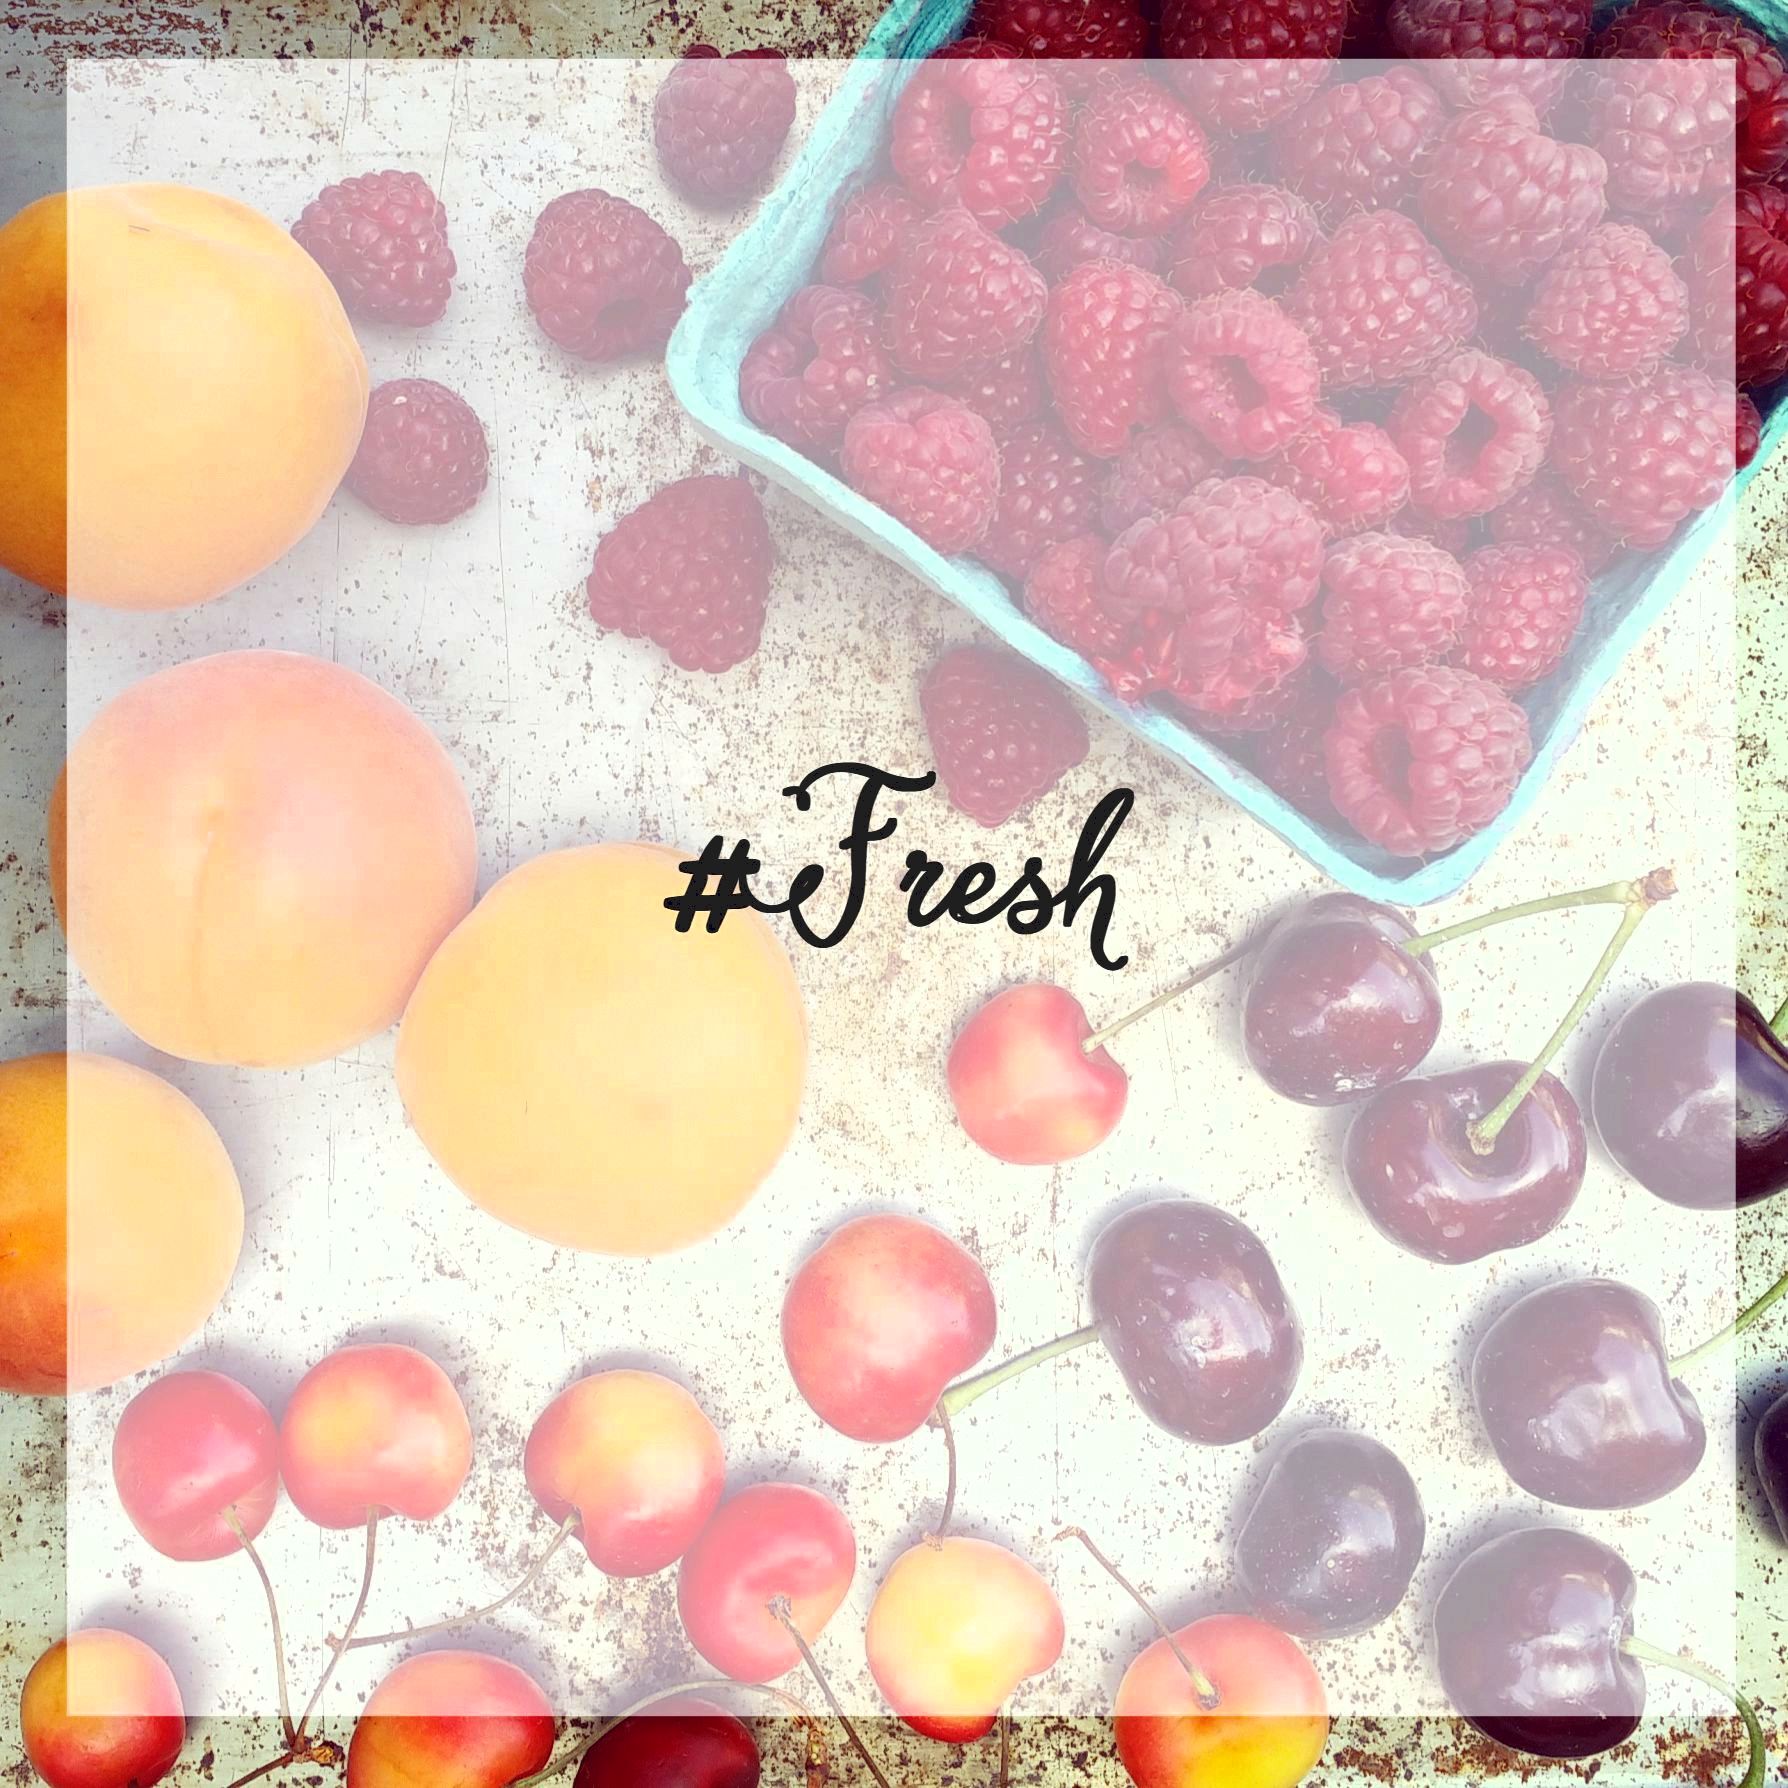 Grow your Instagram following and drive more traffic to your food blog with these foodie hashtags!